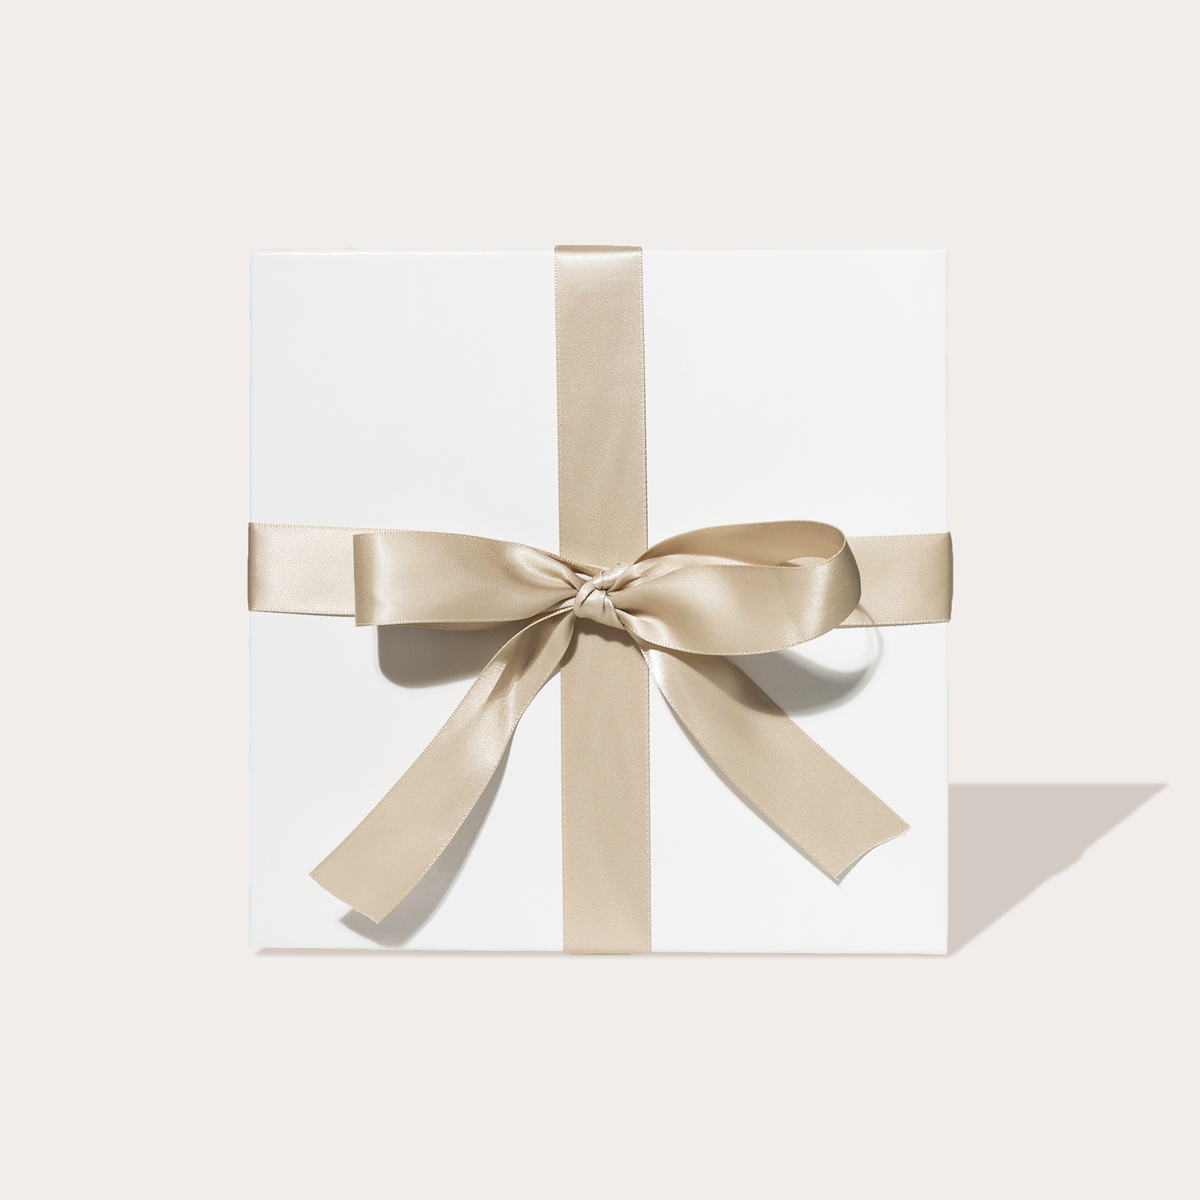 A closeup of the "Travel Essentials" gift set wrapped with a bow.